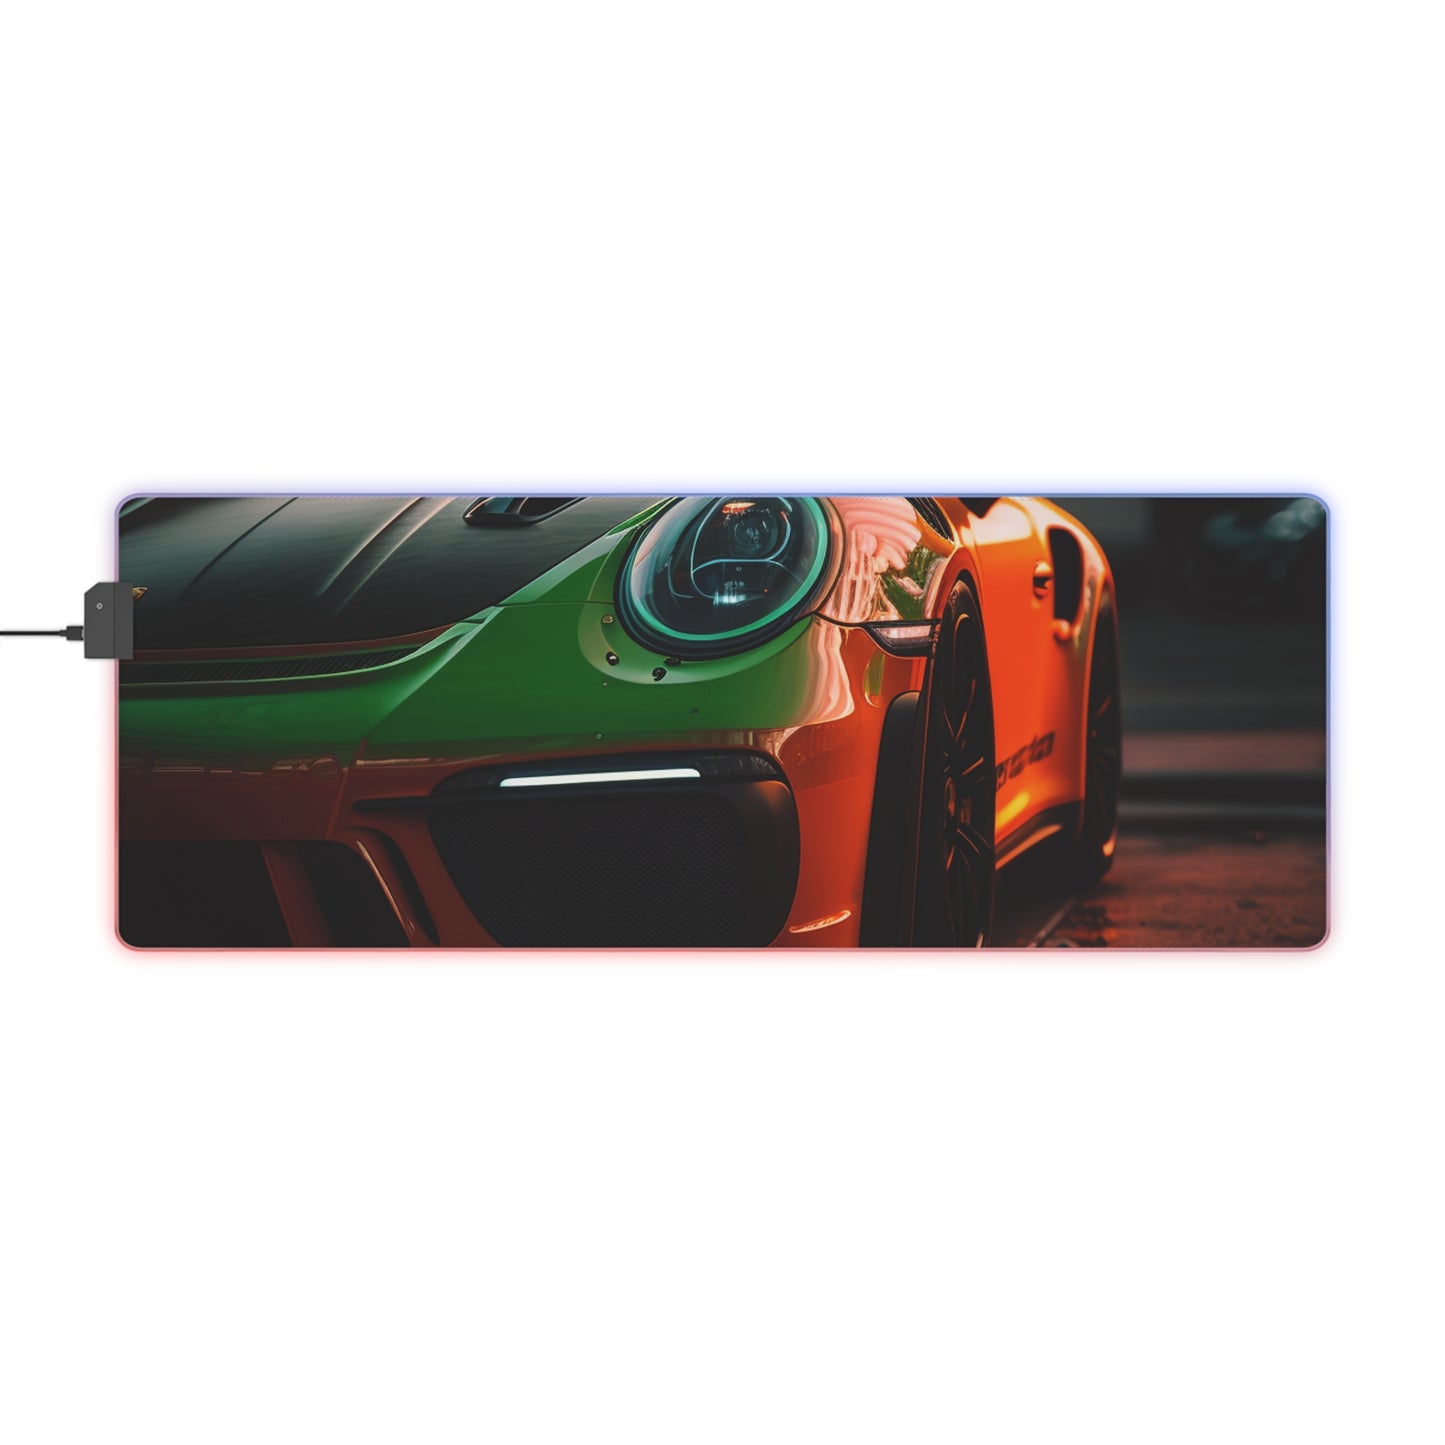 LED Gaming Mouse Pad porsche 911 gt3 2